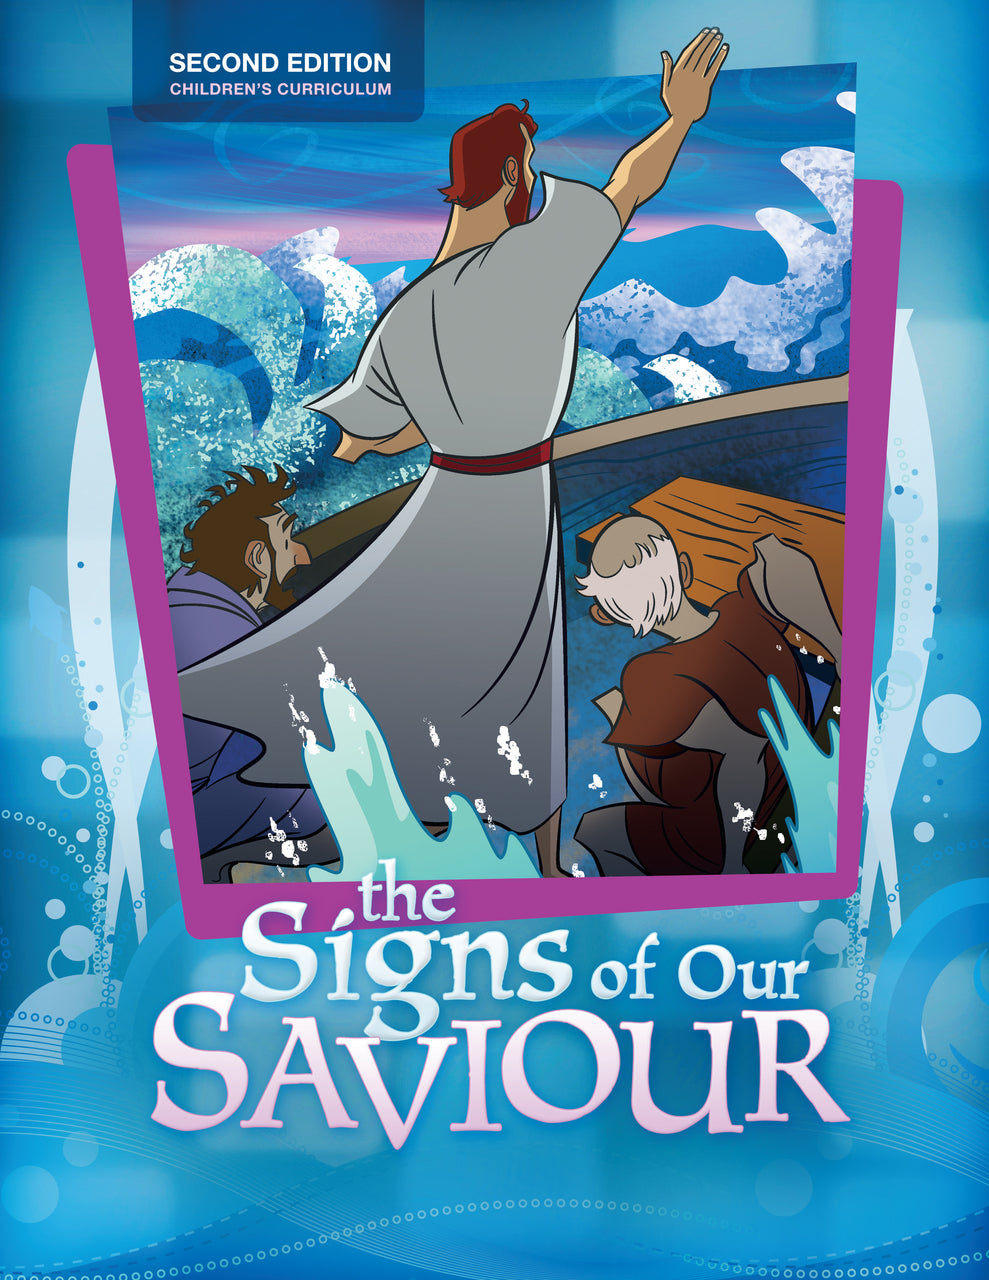 The Life of Christ: Signs of Our Saviour Teacher Edition 2nd Edition